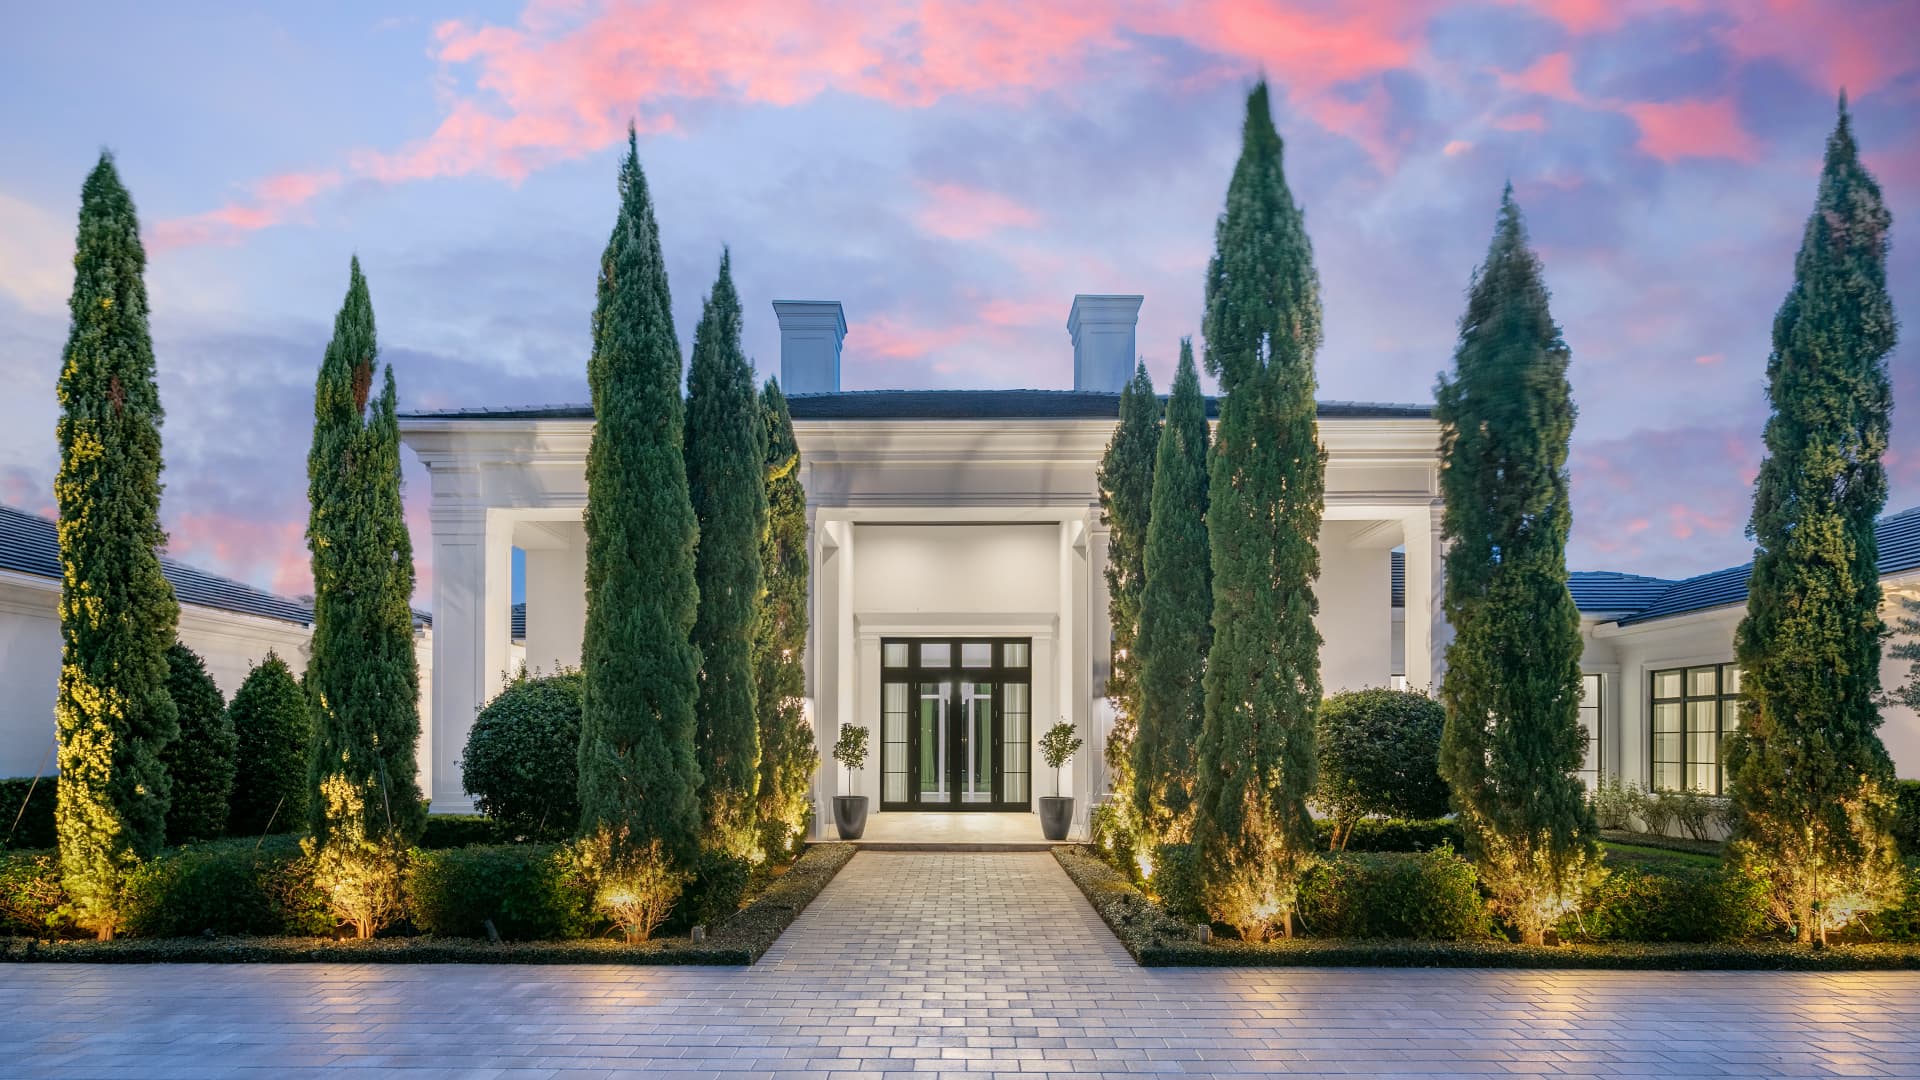 Villa Ananda's entrance is flanked by mature Italian Cypress trees.